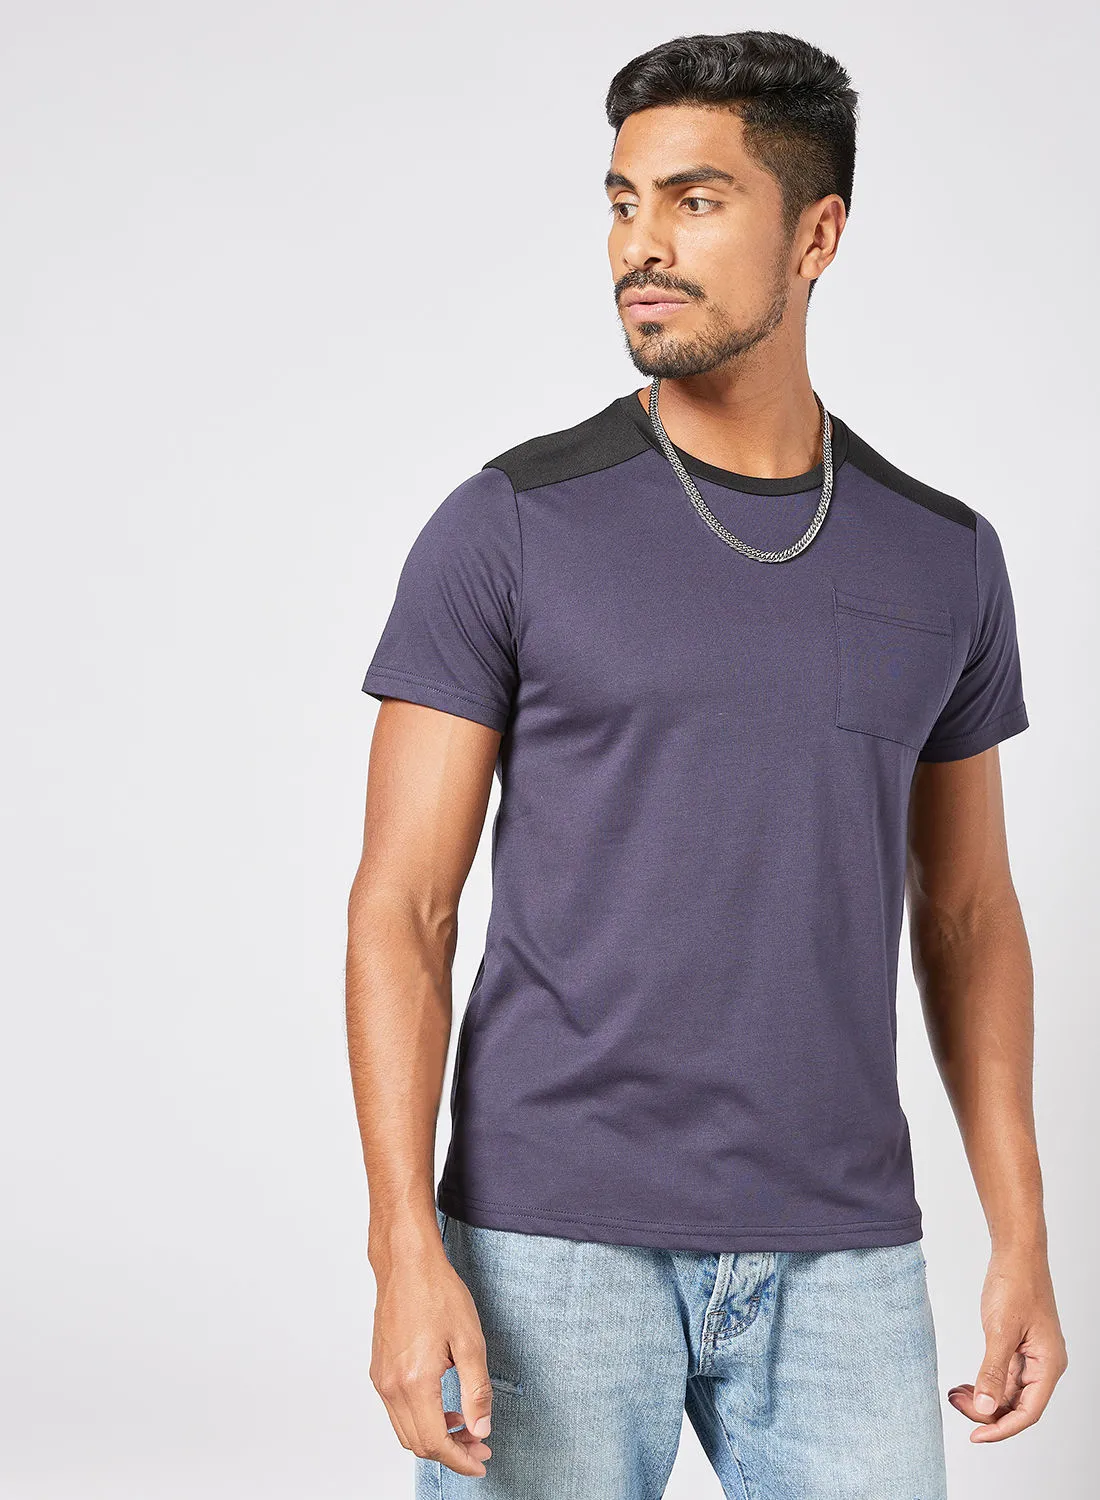 QUWA Trendy Casual Contrast Shoulder Short Sleeves T-shirt with Pocket Navy/Black